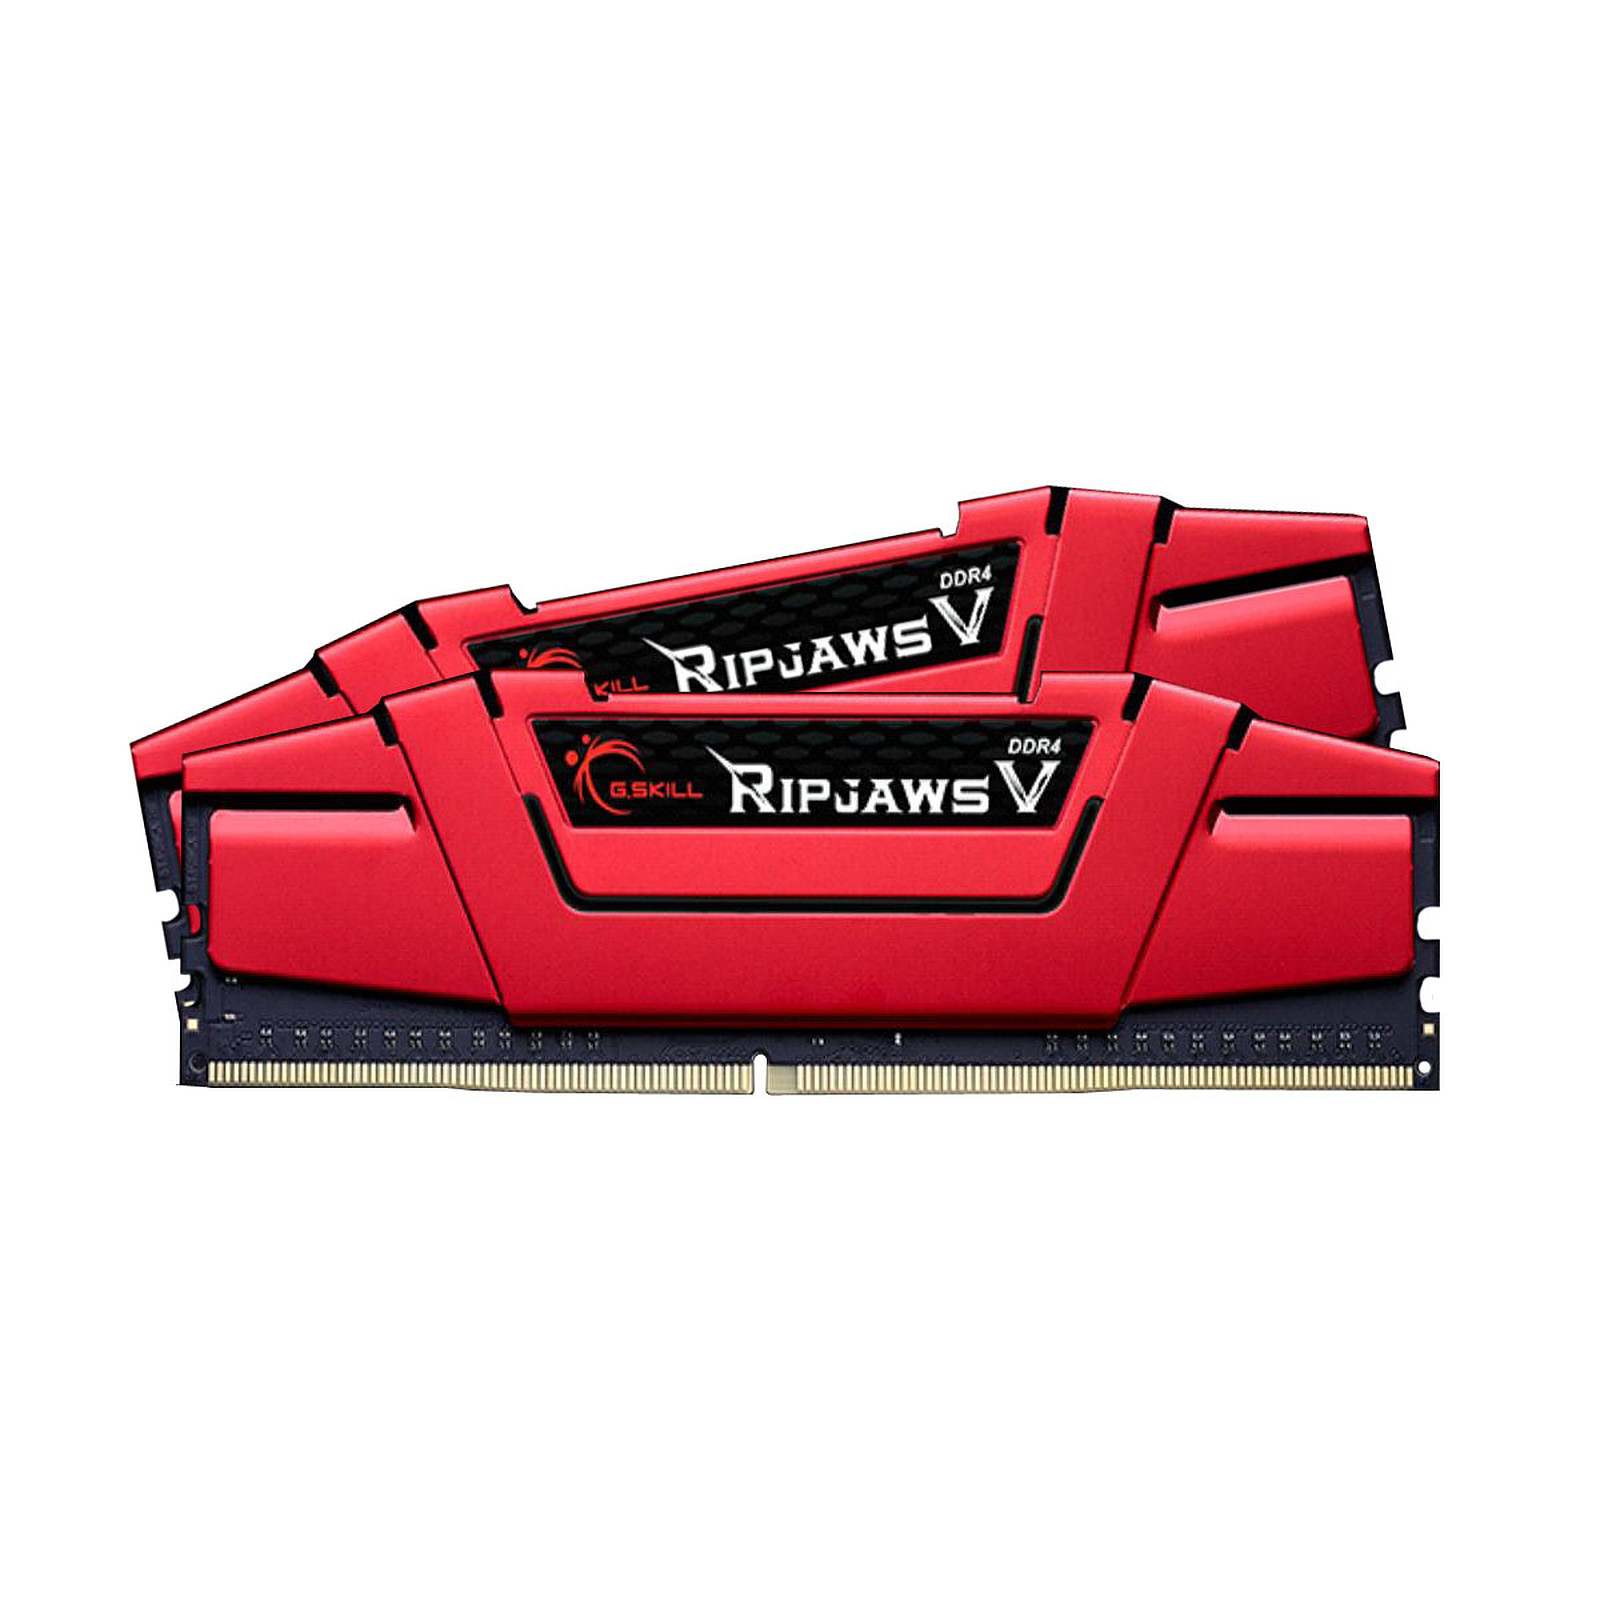 G.Skill RipJaws 5 Series Rouge 8 Go (2x 4 Go) DDR4 2133 MHz CL15 - Memoire PC G.Skill